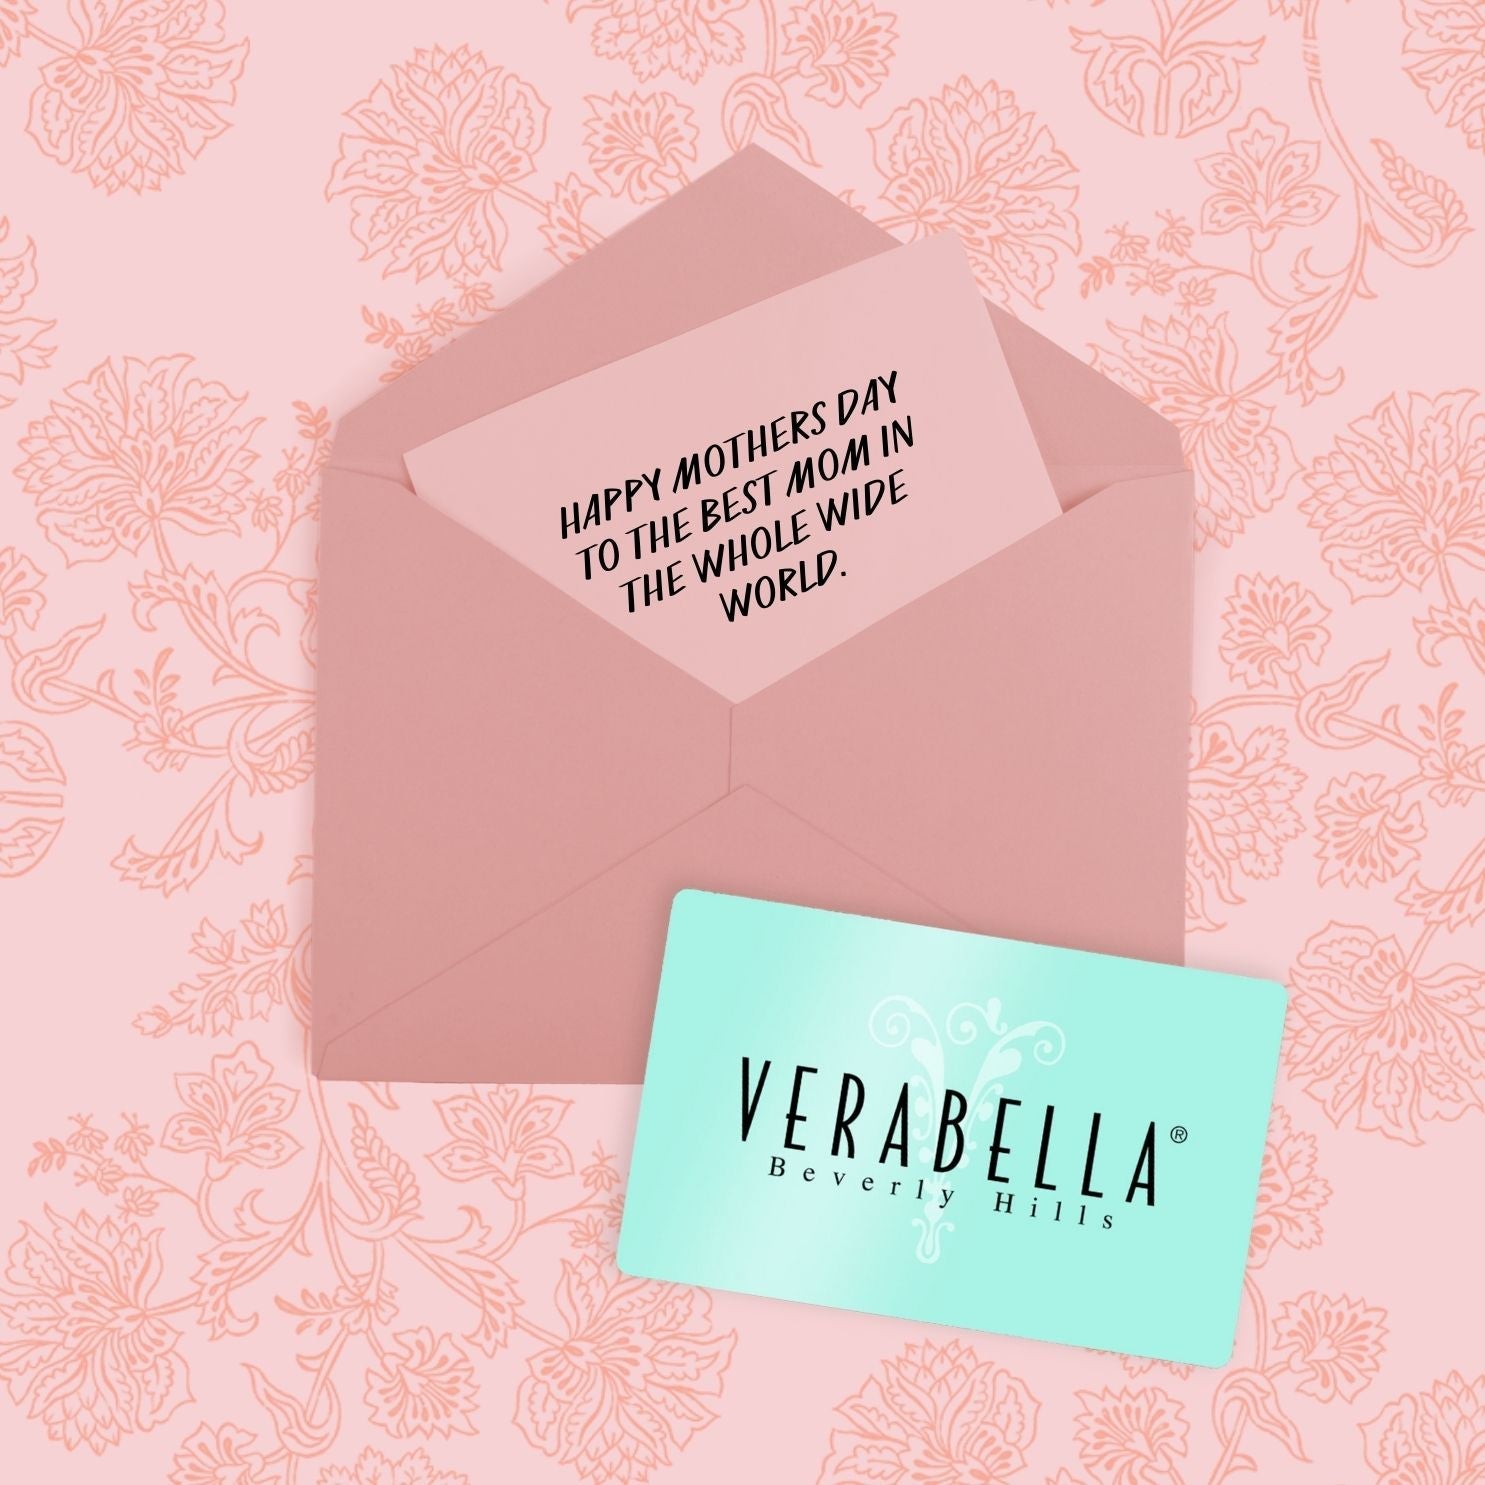 Looking for a unique Mother's Day gift? VERABELLA skincare